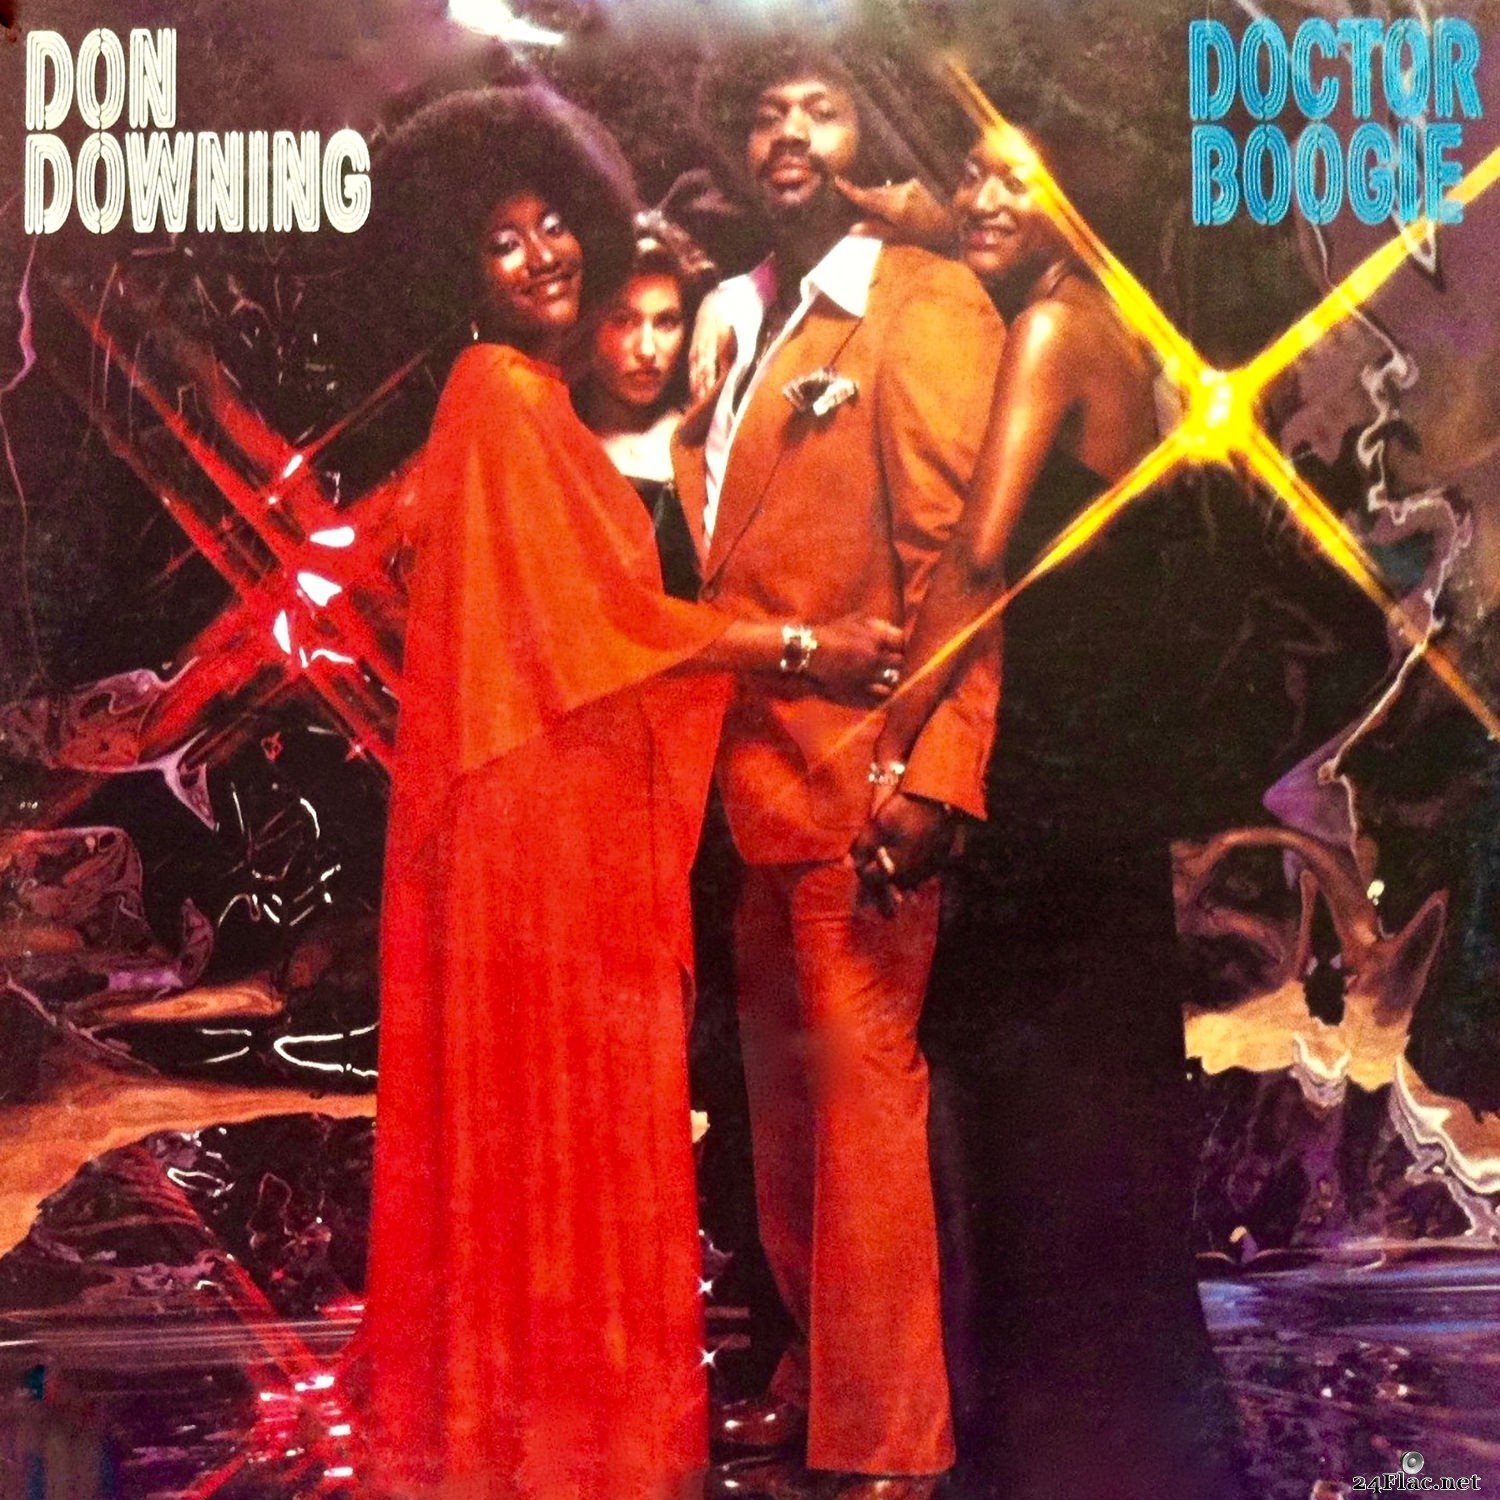 Don Downing - Doctor Boogie (2016) Hi-Res